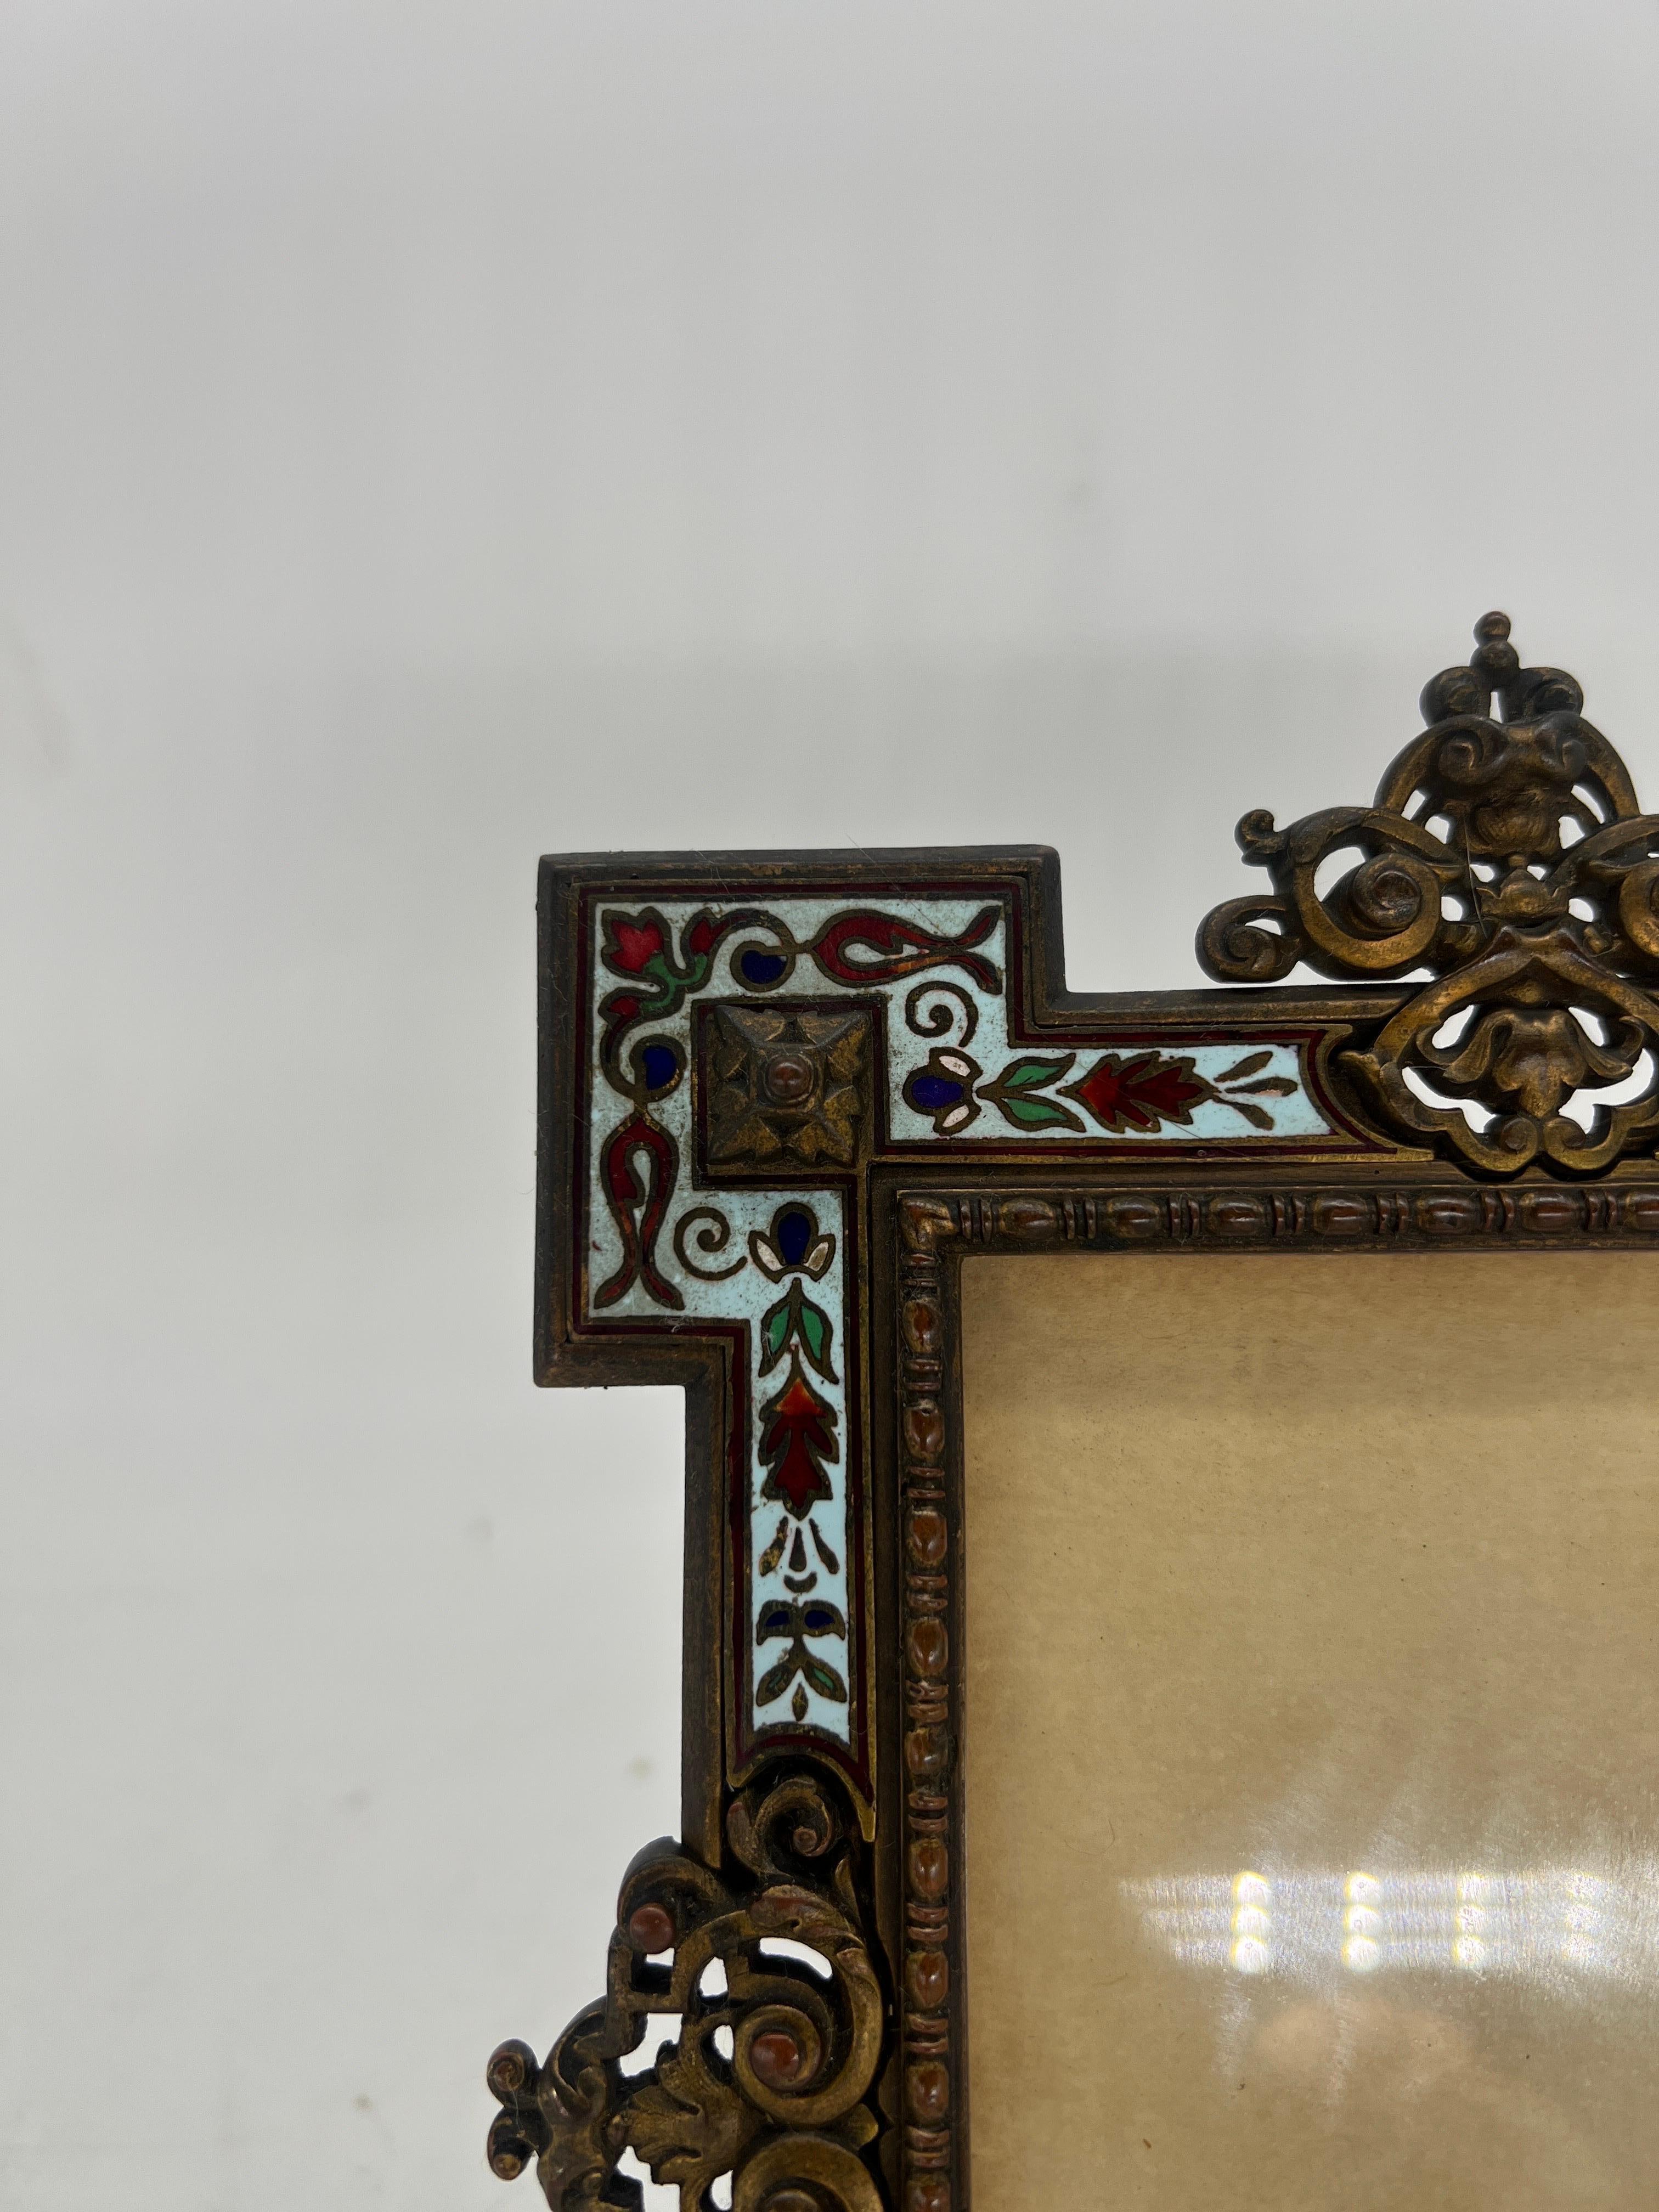 French, Circa 1890.

An antique French champleve enamel picture frame with a Renaissance Revival styling. Beautiful bronze scroll work accents the blue and floral enameled edge.